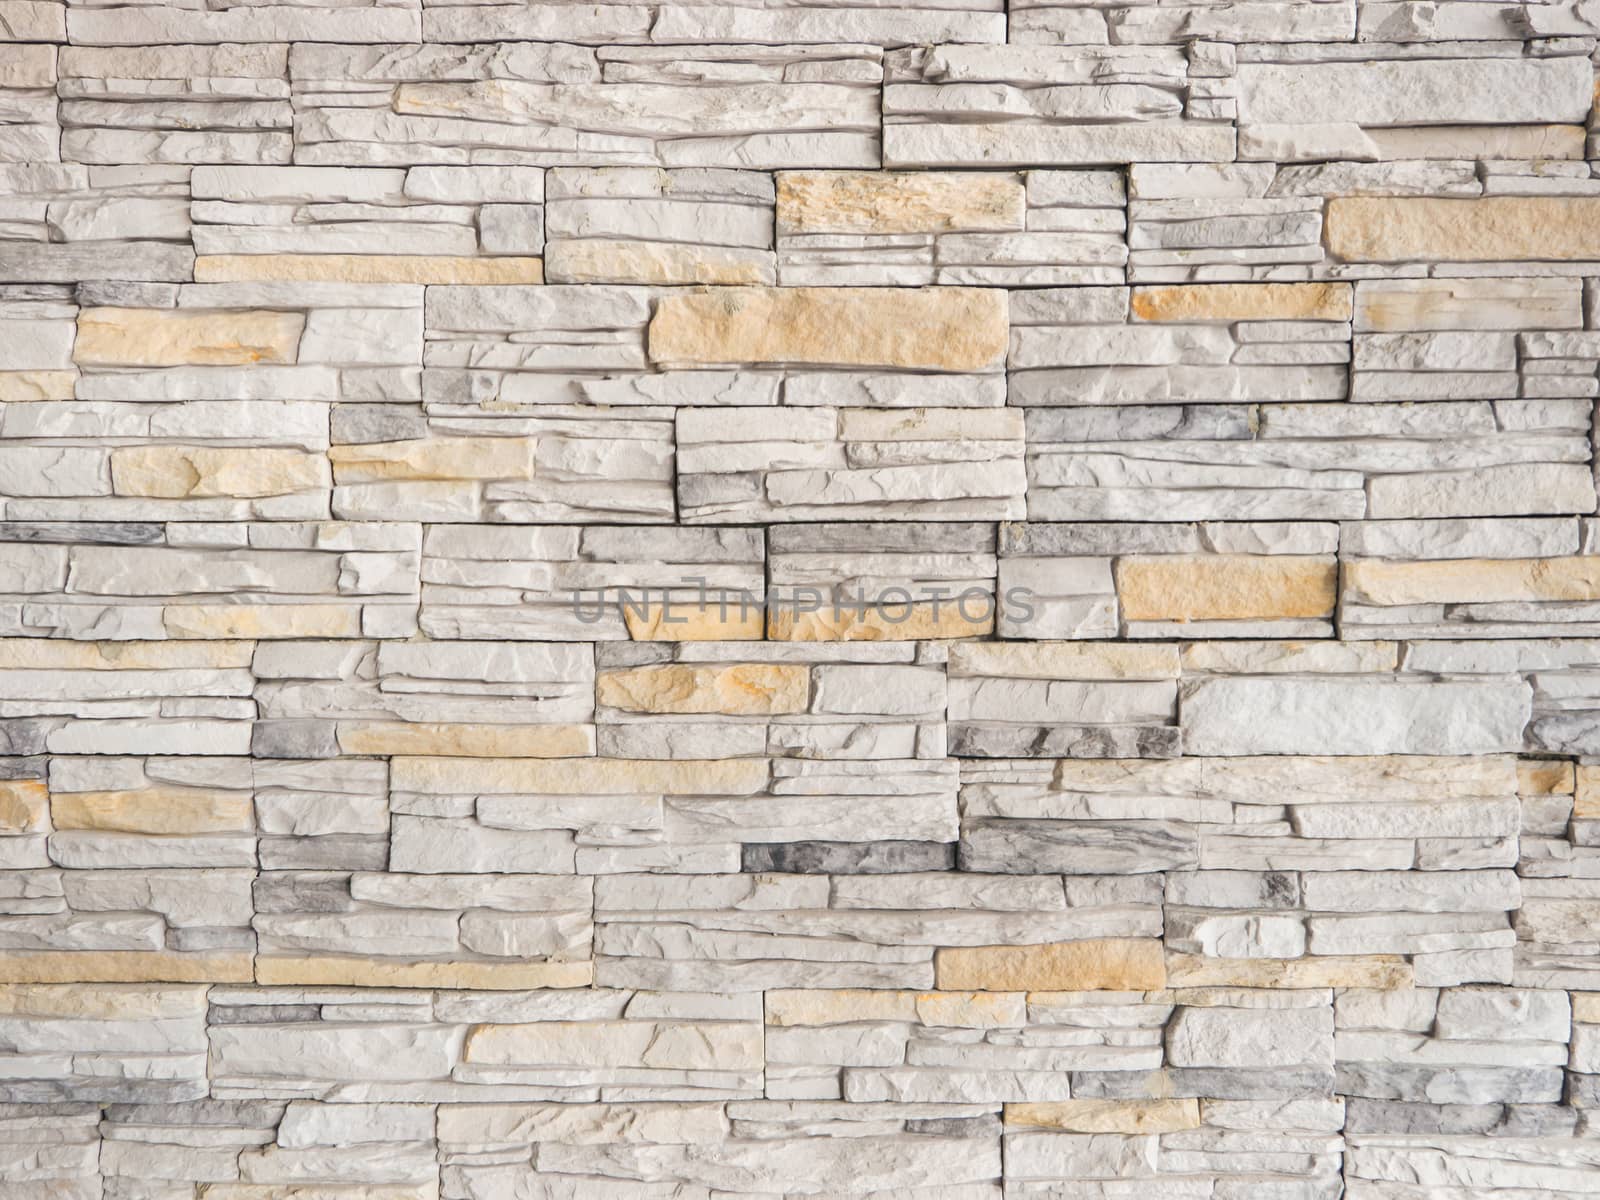 a wall from an artificial gray stone facade with rough fractured surfaces as background